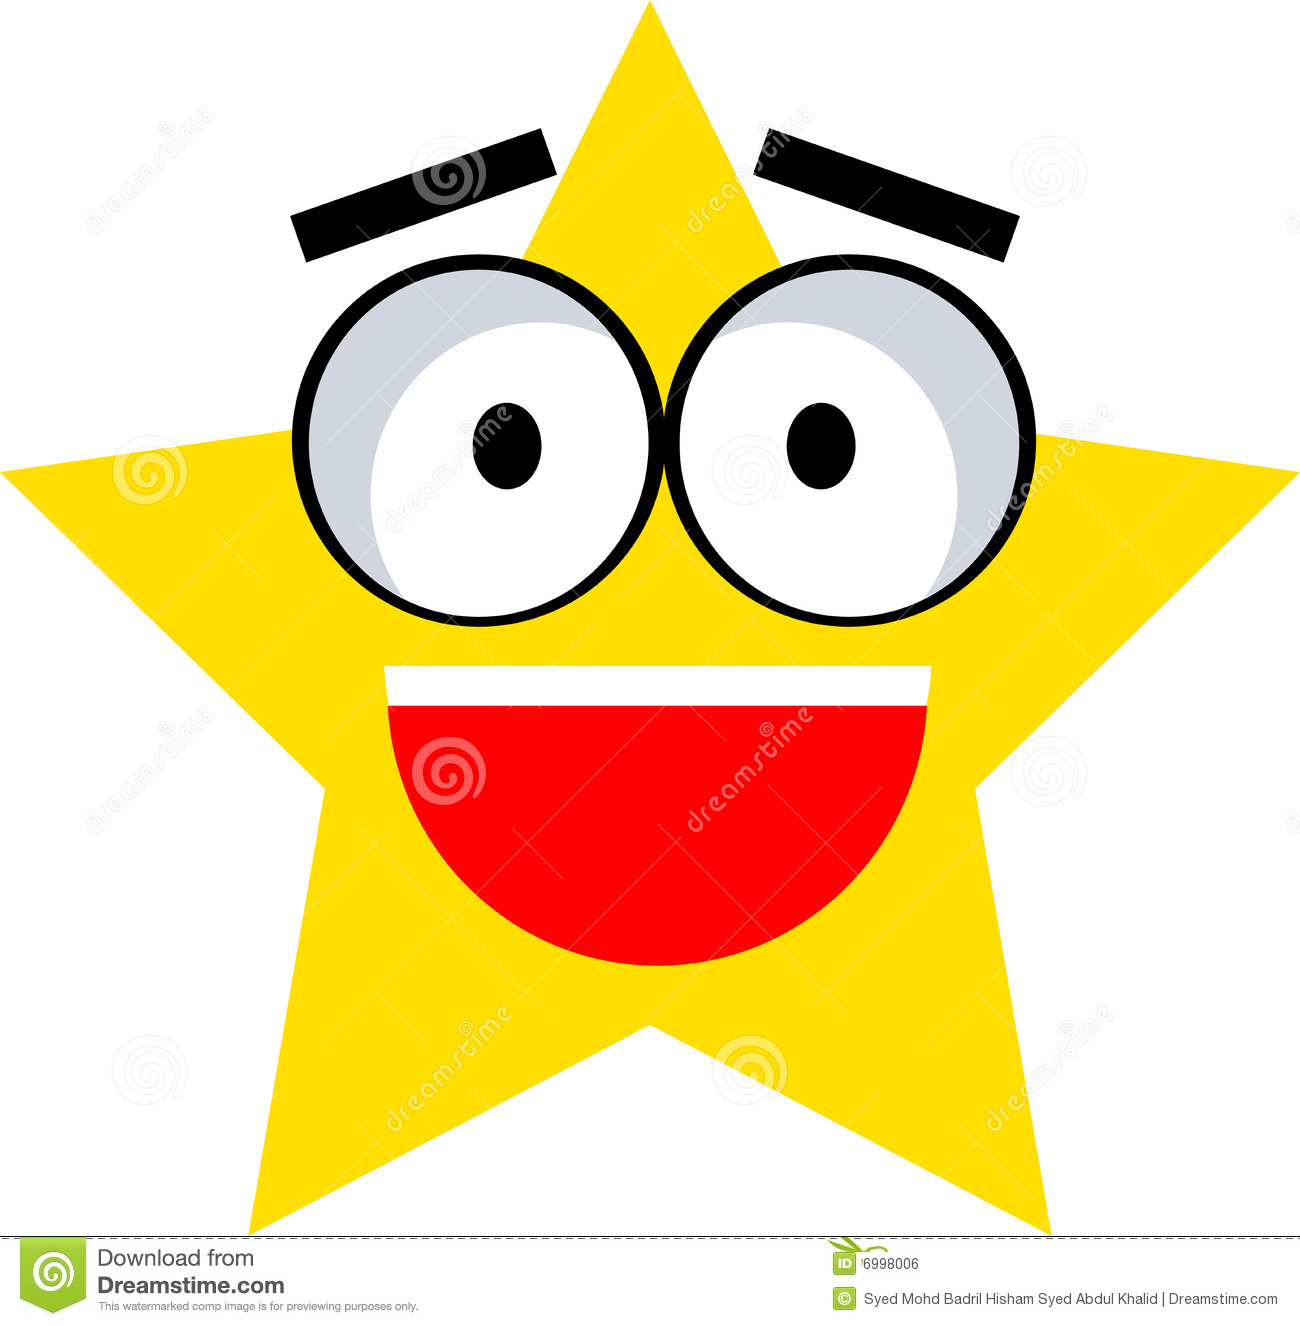 Twinkle Little Star Clipart   Free Clip Art Images